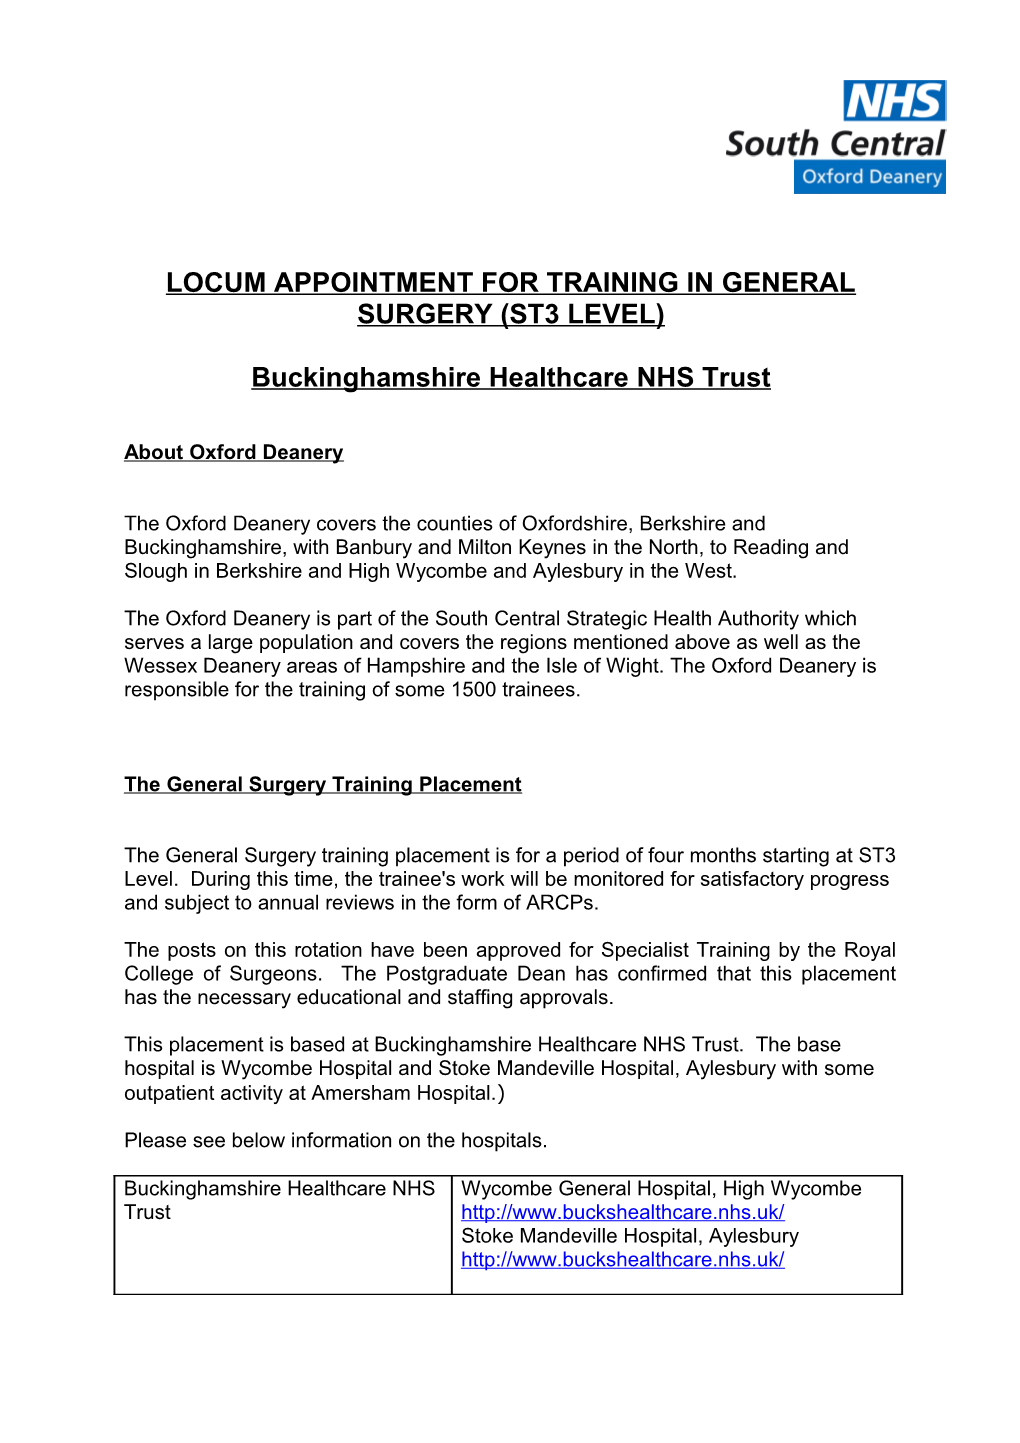 Locum Appointment for Training in General Surgery (St3 Level)